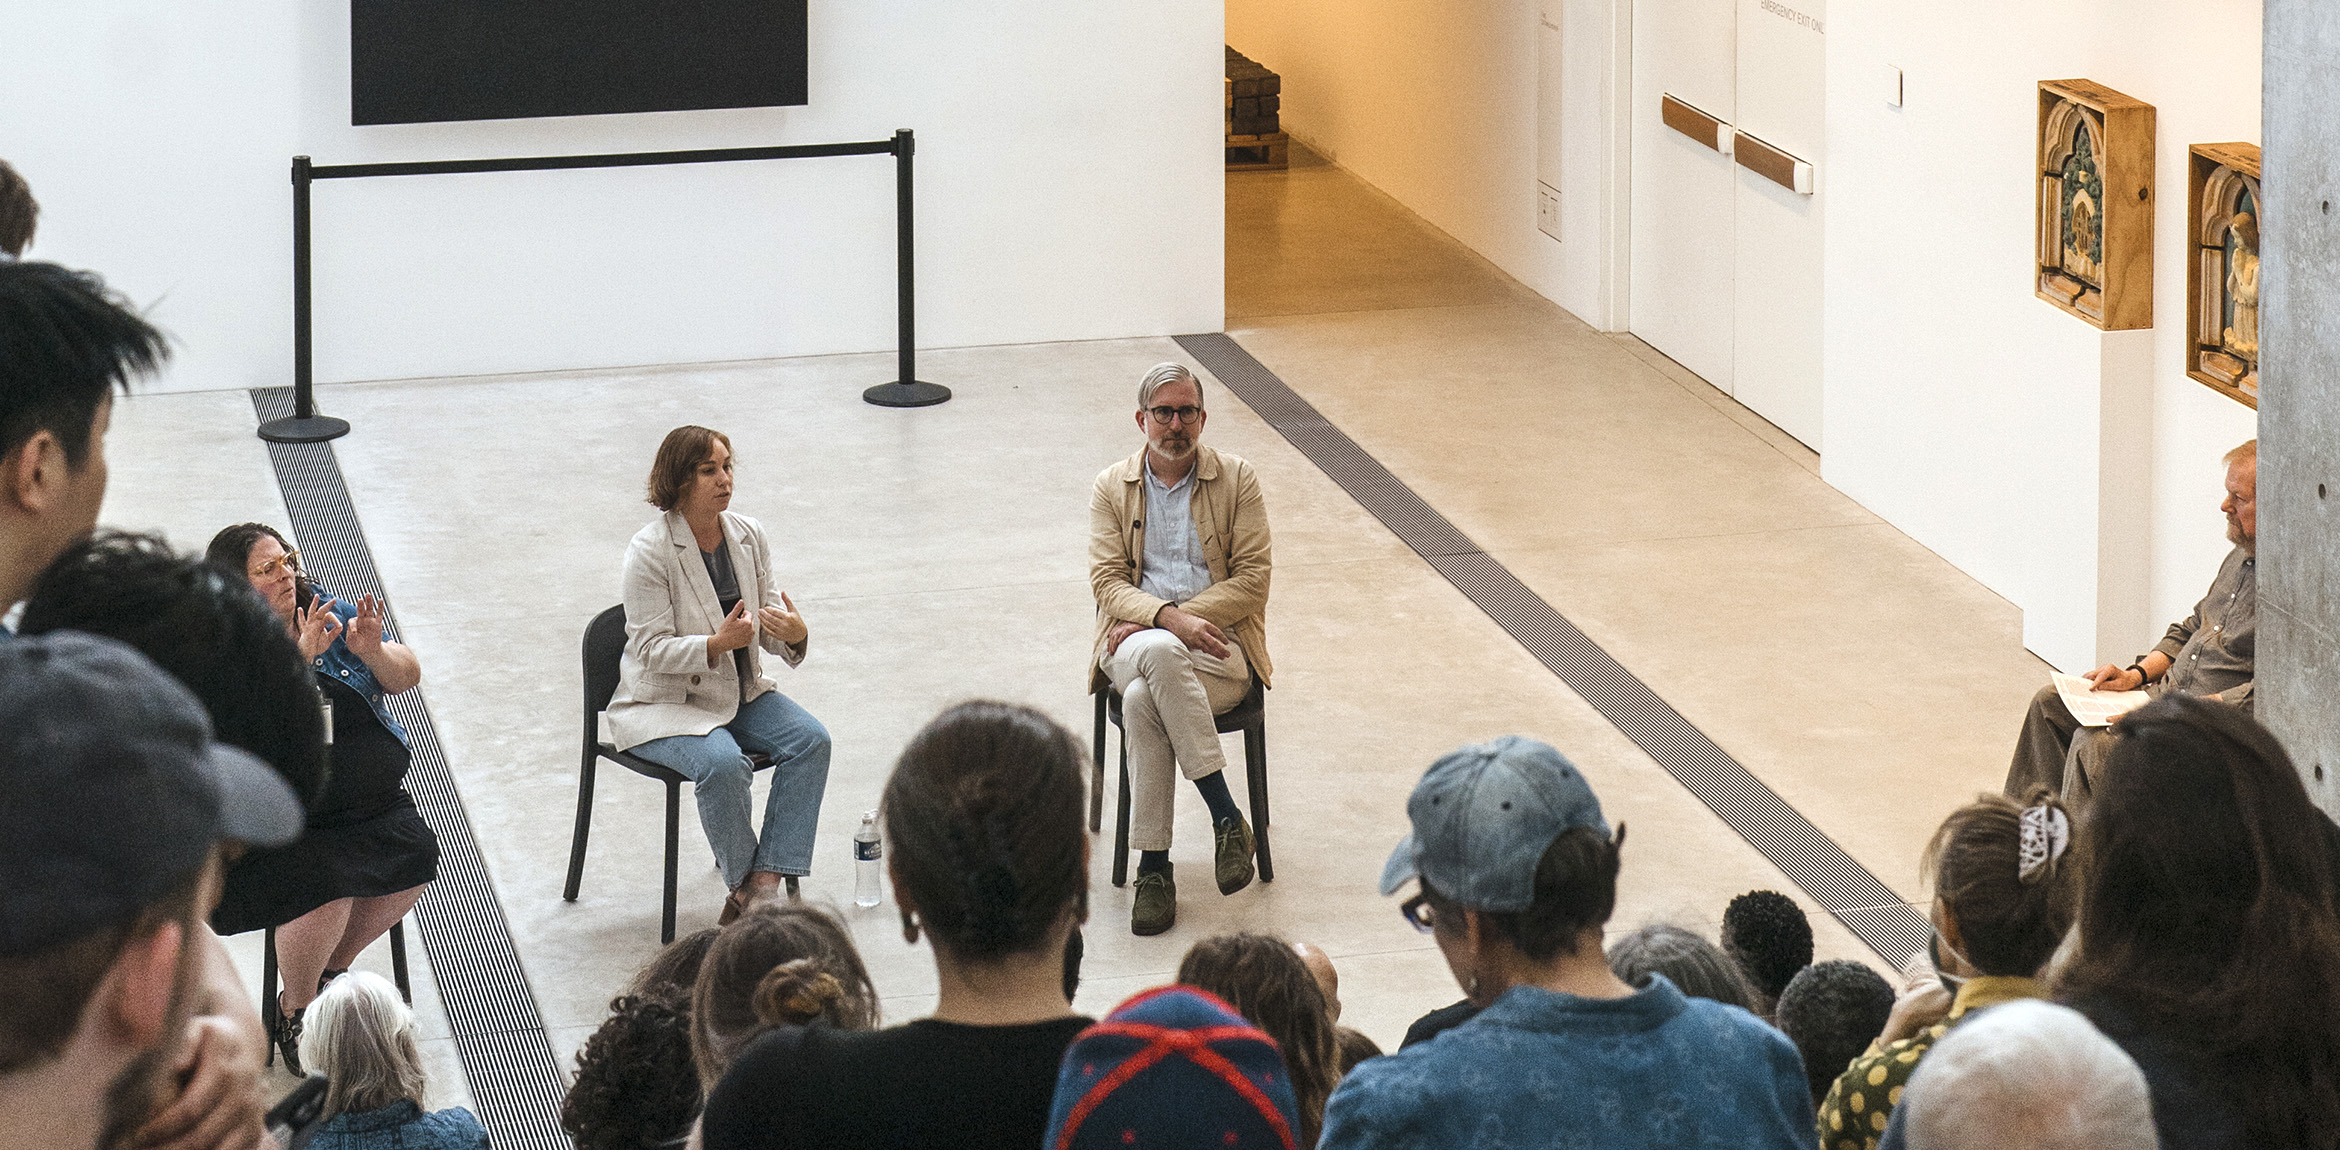 Michael Allen and Stephanie Weissberg seated in front of a crowd in the museum